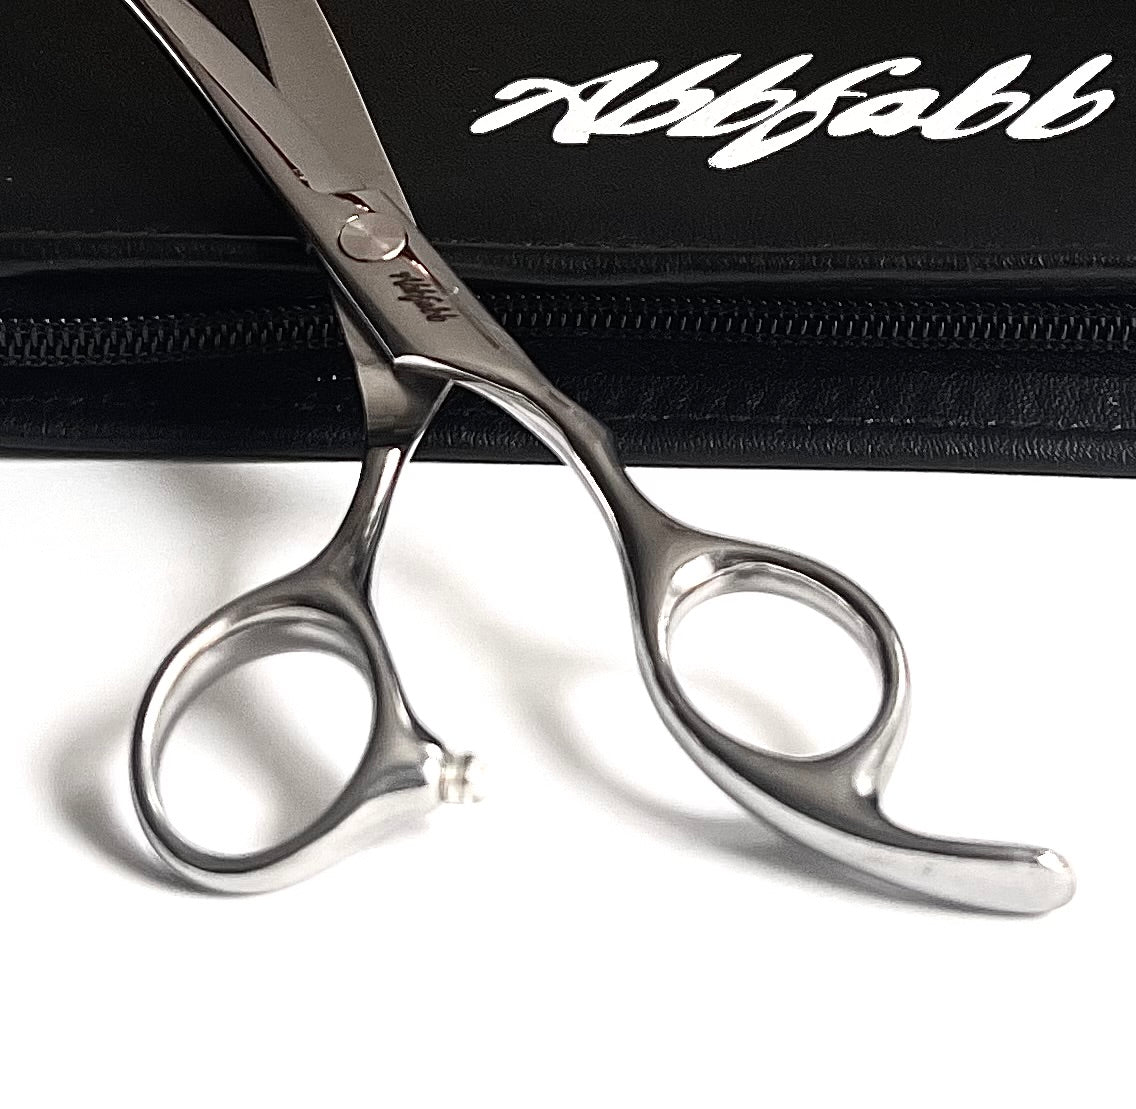 curved dog grooming scissor-curved grooming shear- curved shears for dog grooming- curved scissors for dog grooming-Abbfabb